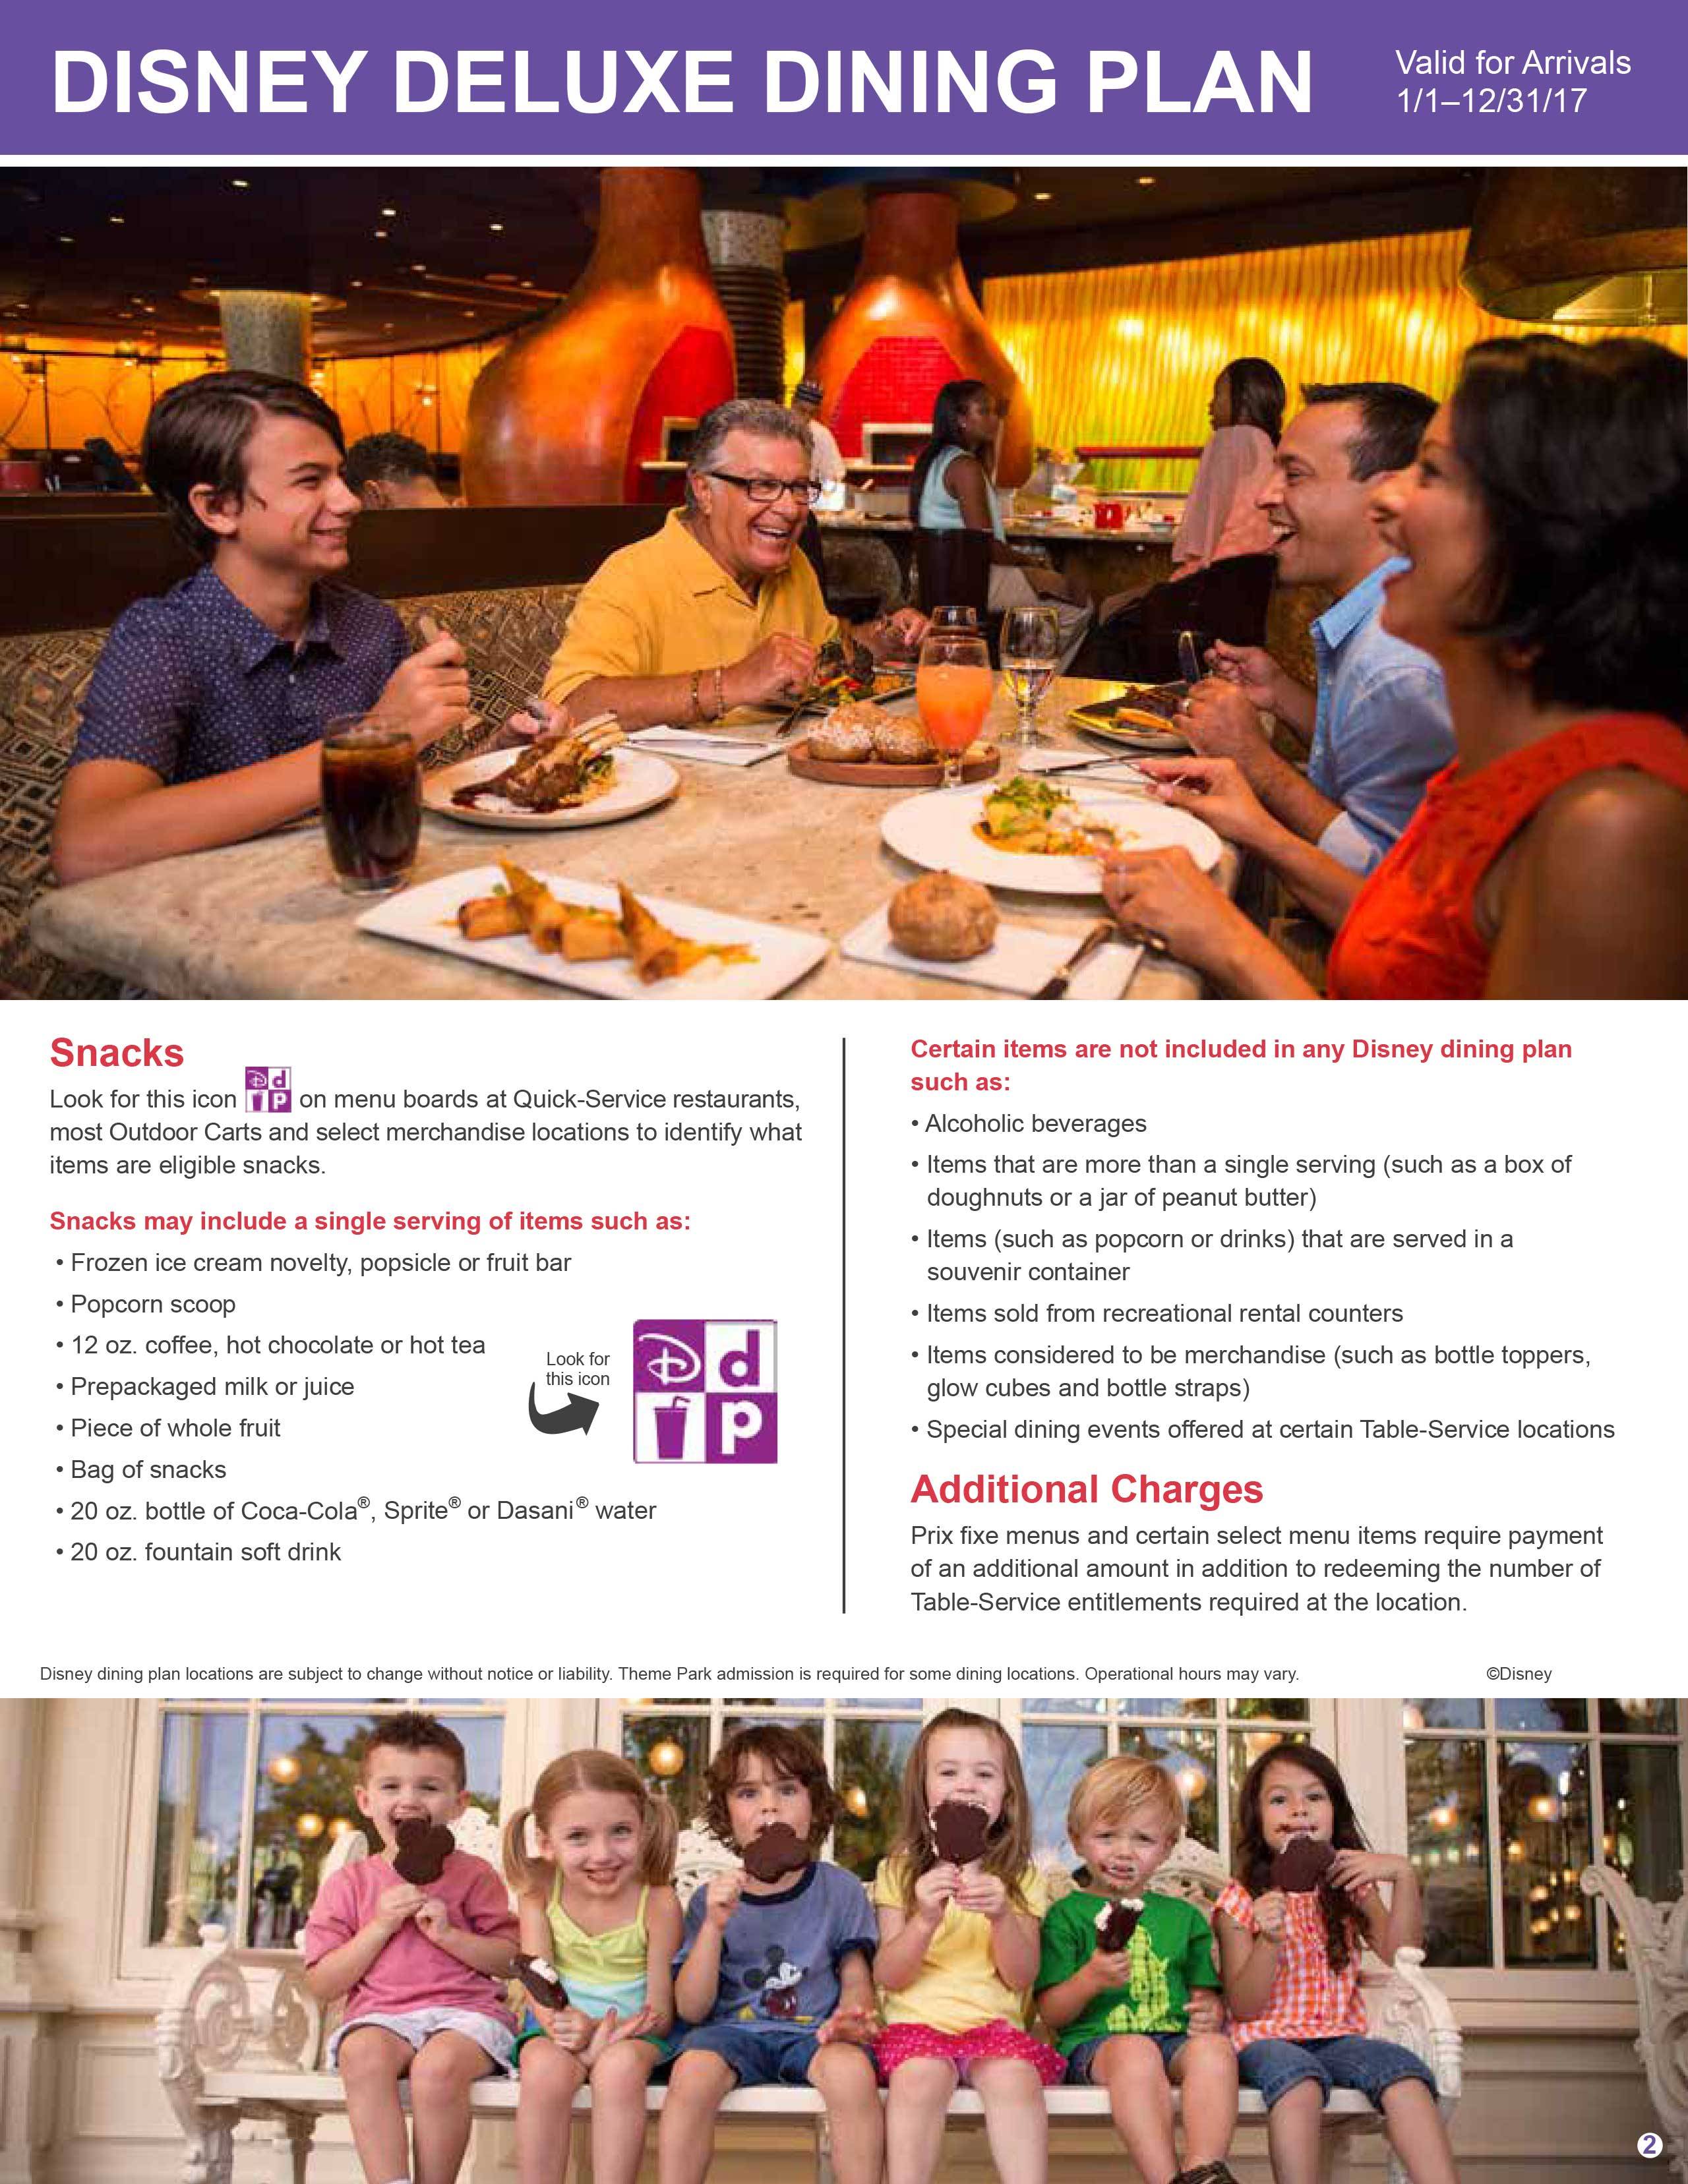 2017 Disney Deluxe Dining Plan brochure - Page 2